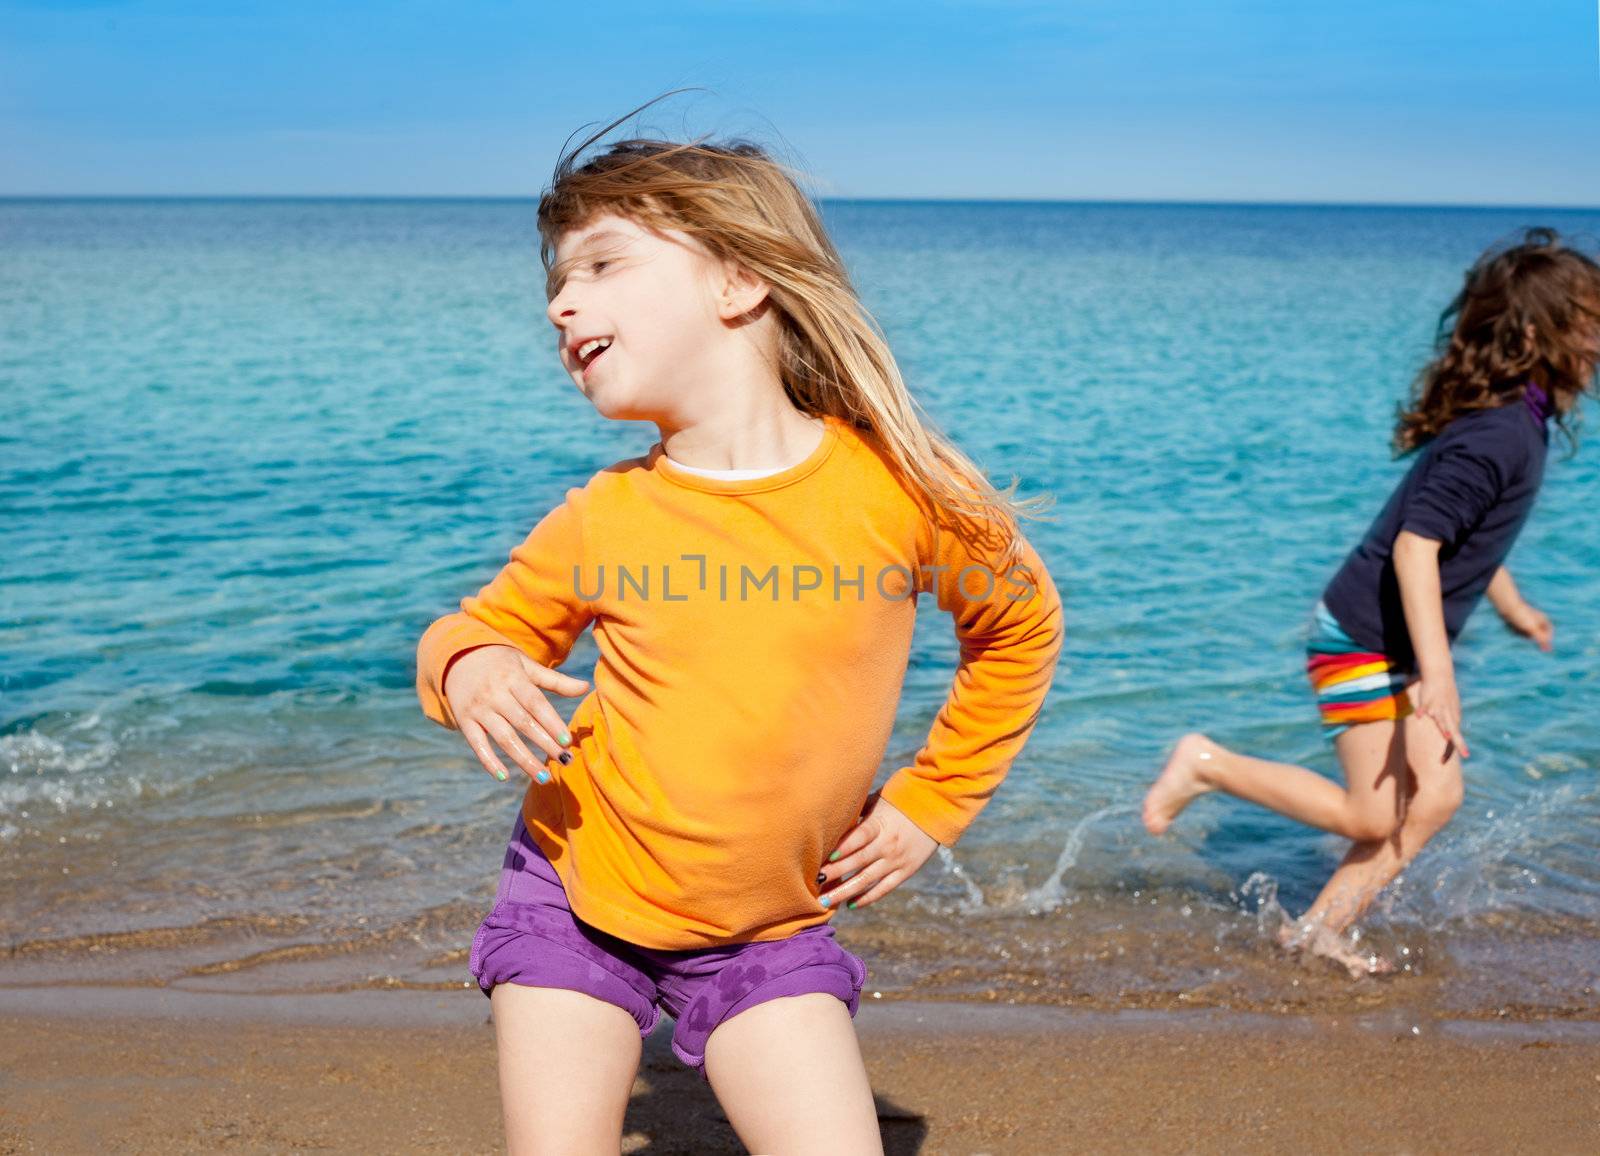 Blond kid girl dancing on the beach and her friend running on shore